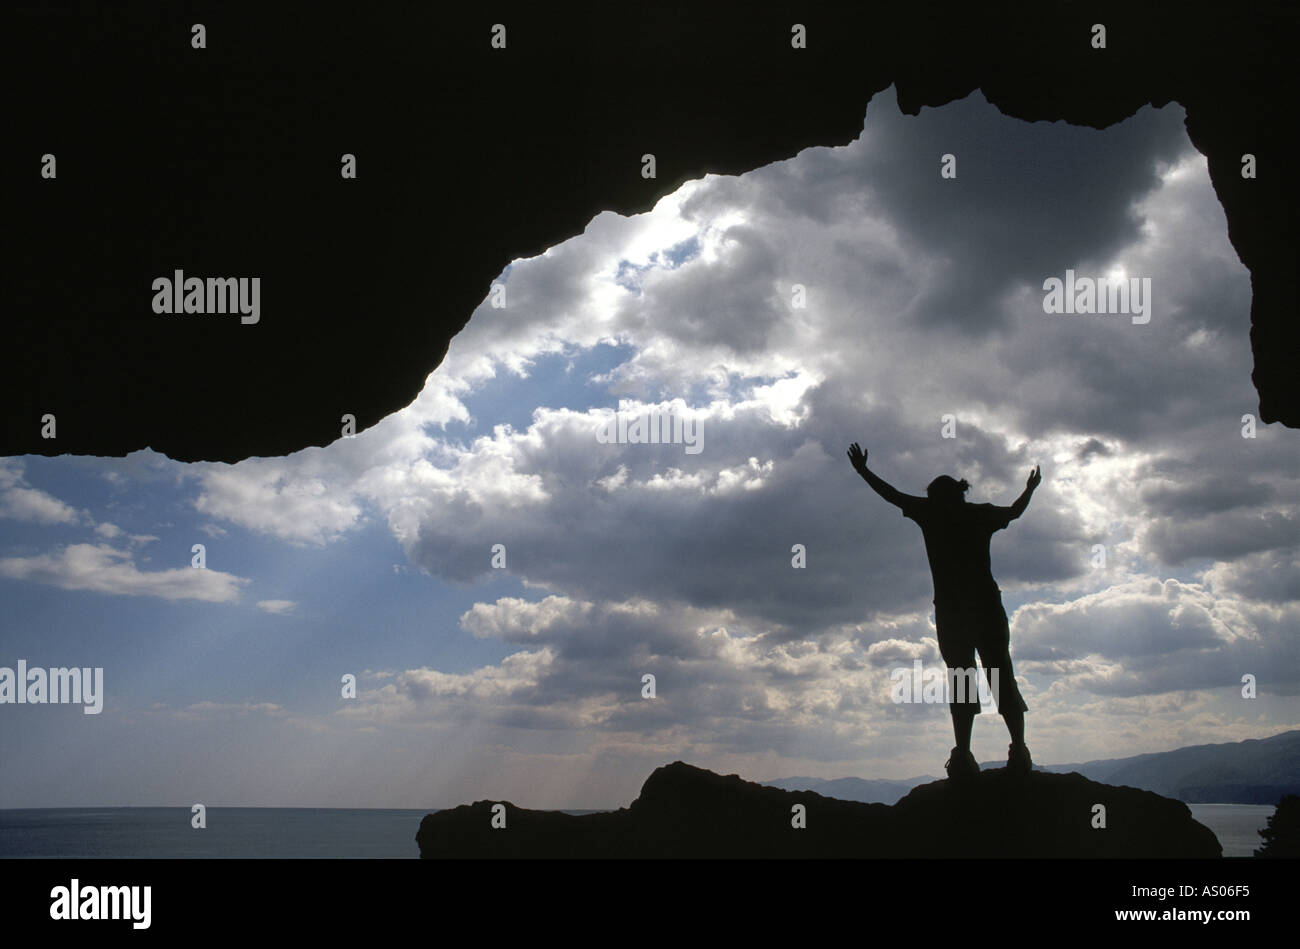 A person stands in a cave with clouds and sea Stock Photo